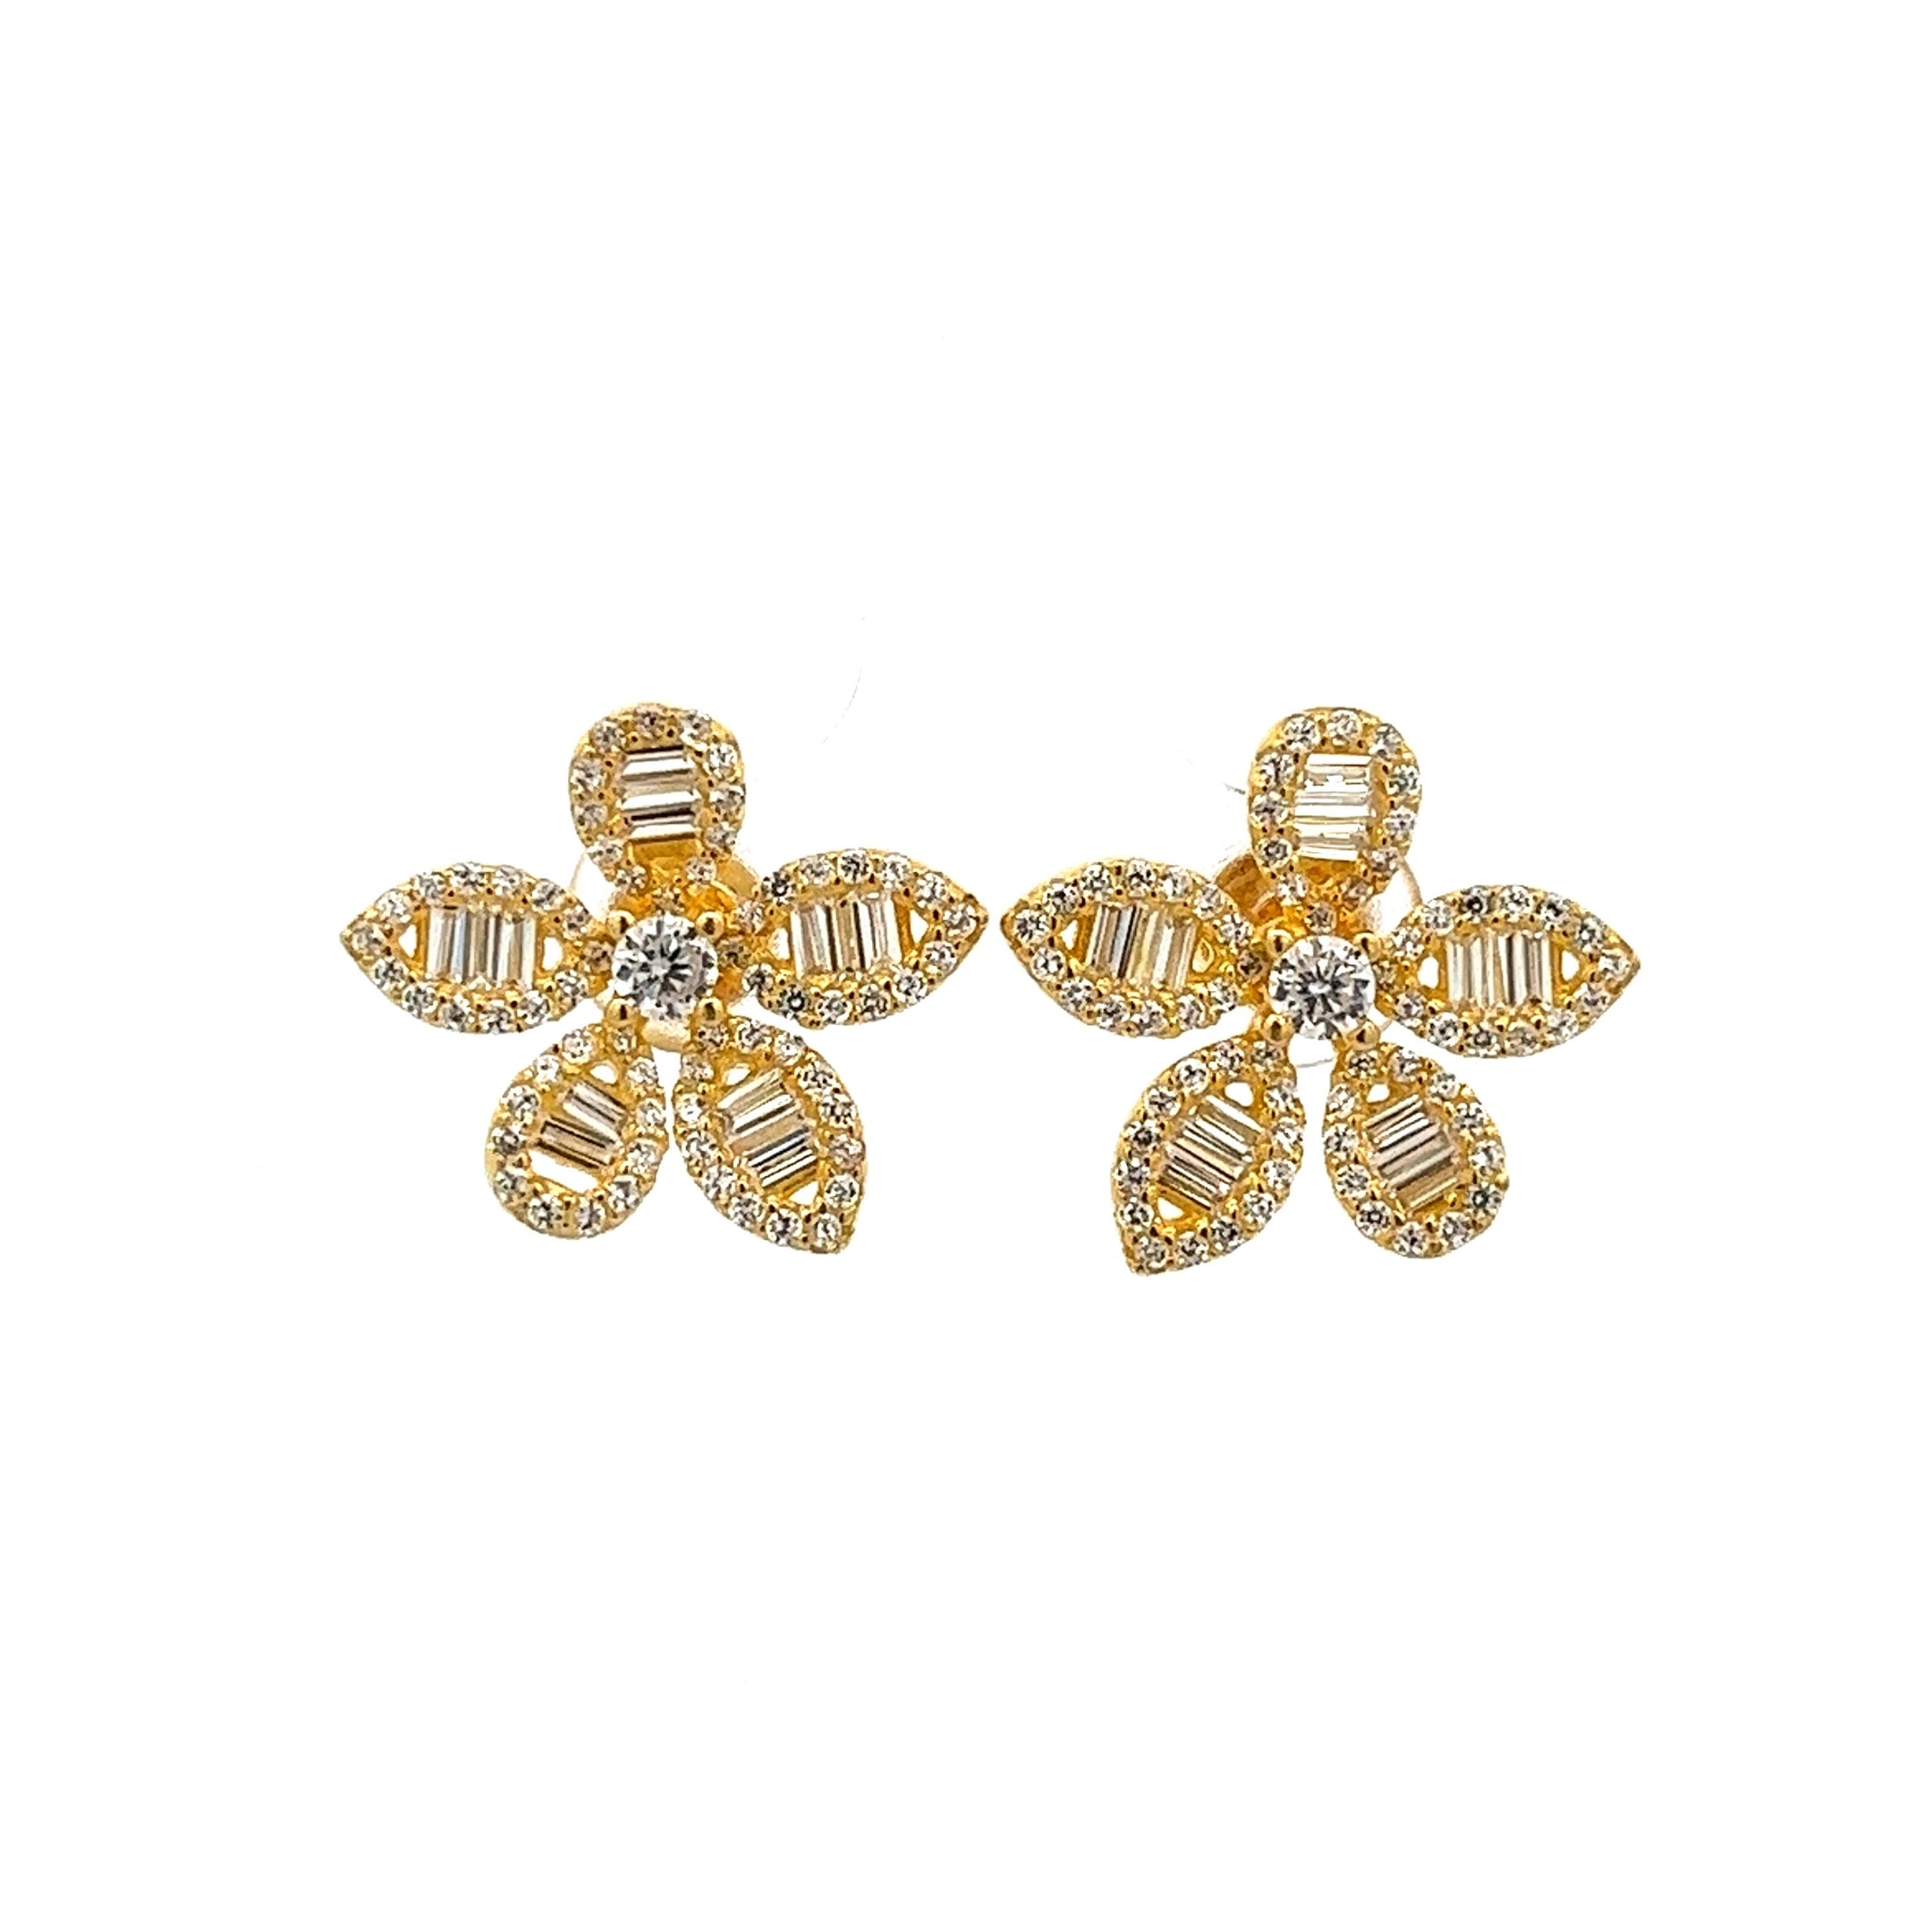 925 GOLD PLATED FLOWER EARRINGS WITH CRYSTALS